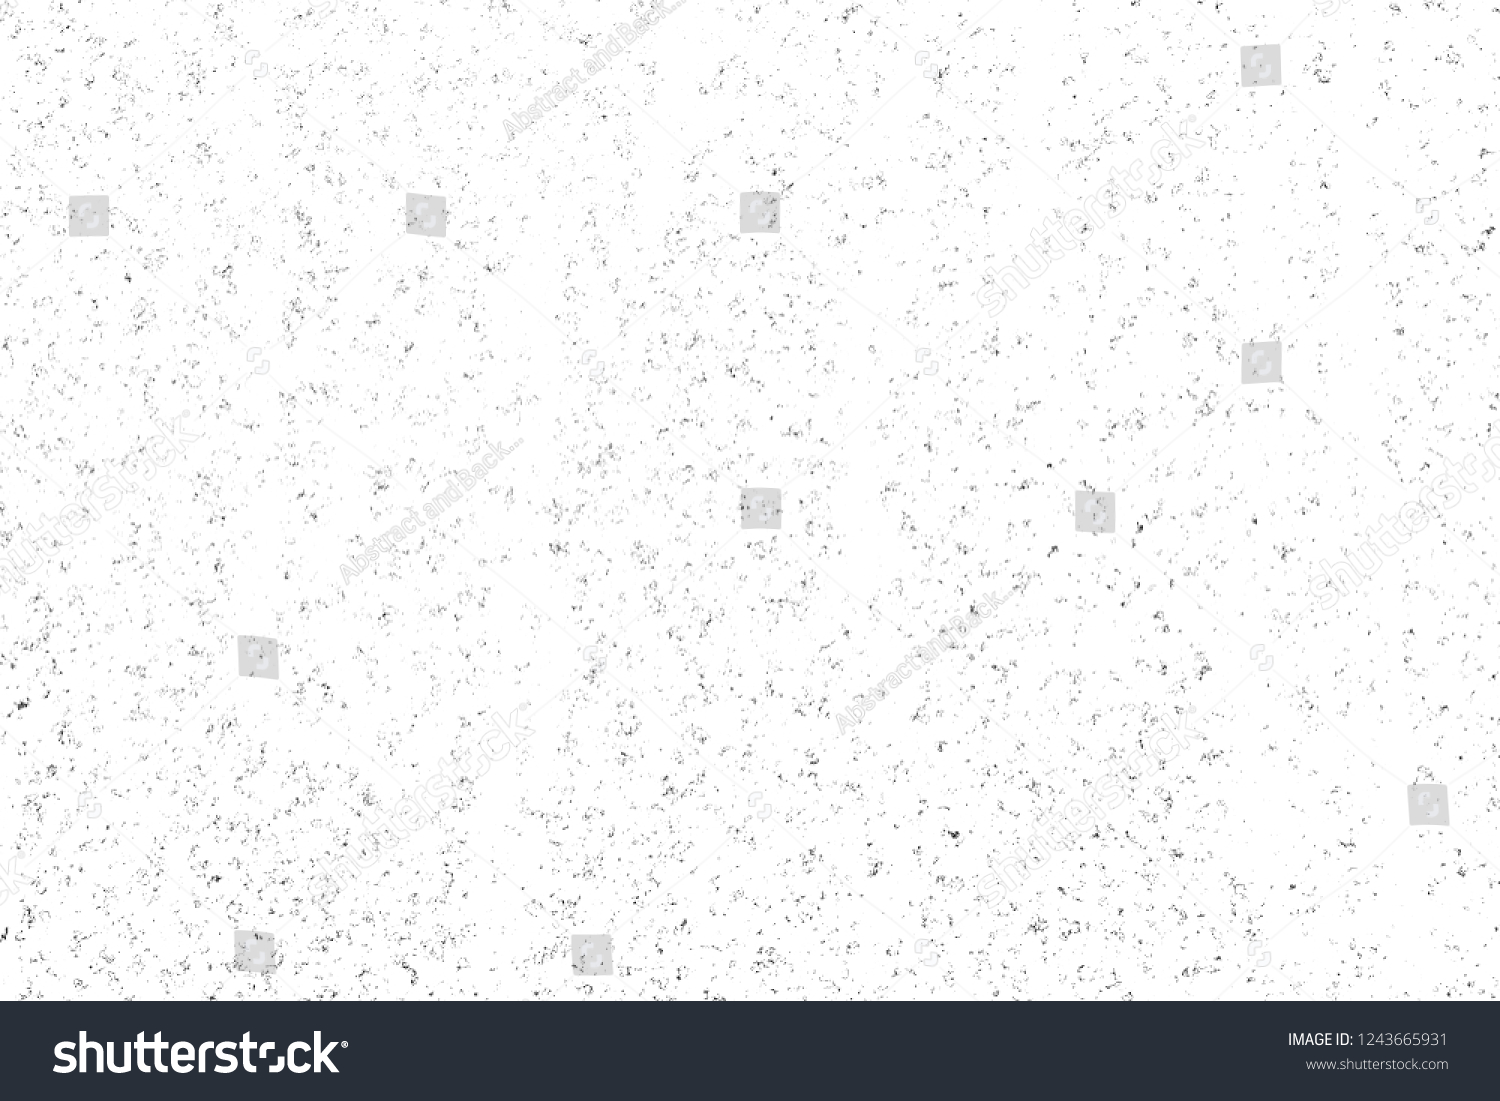 Abstract monochrome background. Texture is black and white in grunge style. Pattern of chips, cracks, scuffs, dust, stains. #1243665931